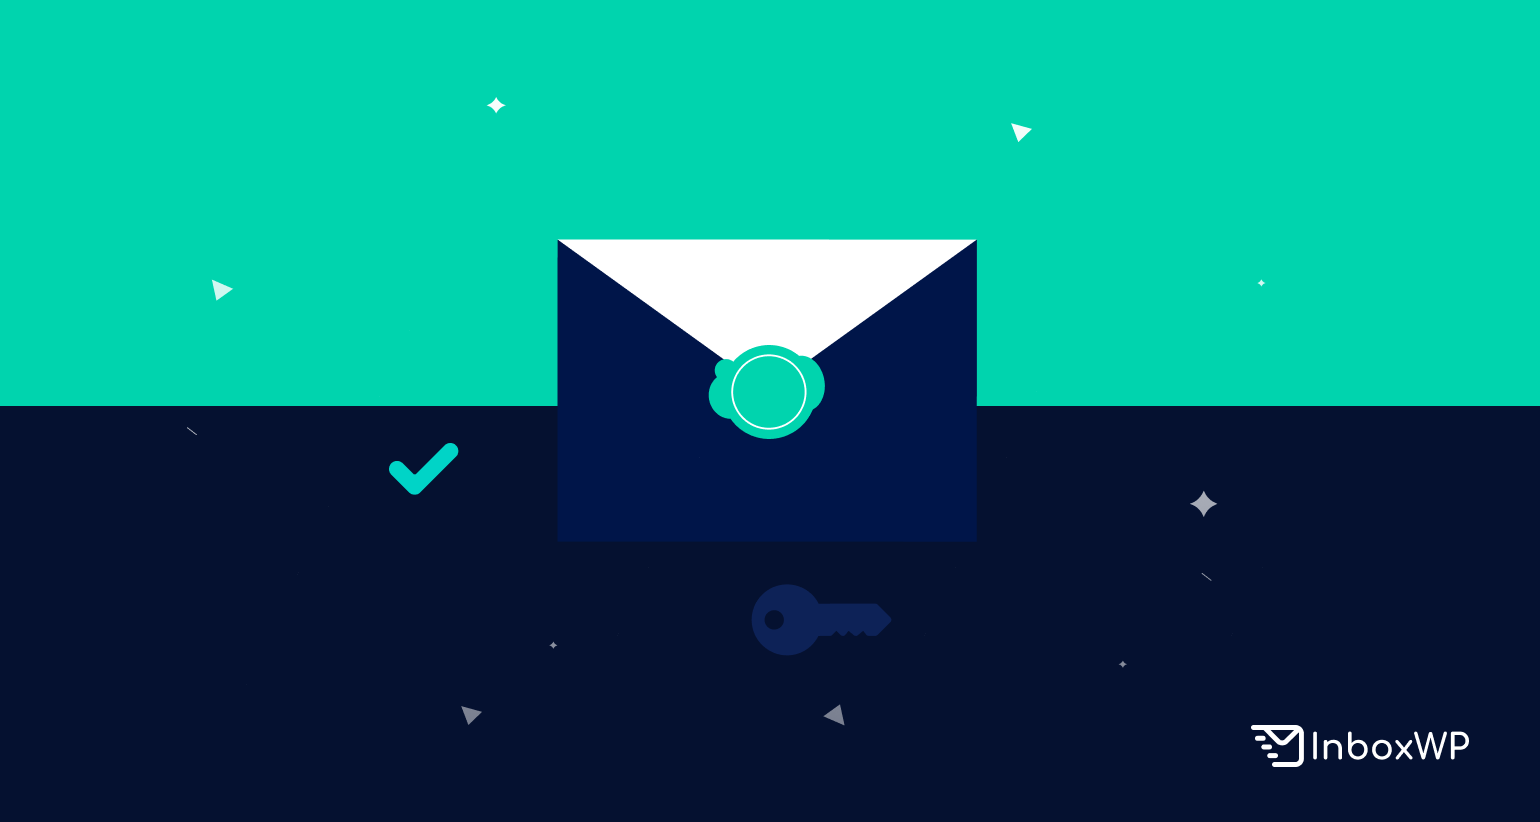 Focus on decreasing the bounce rate to improve email deliverability rate